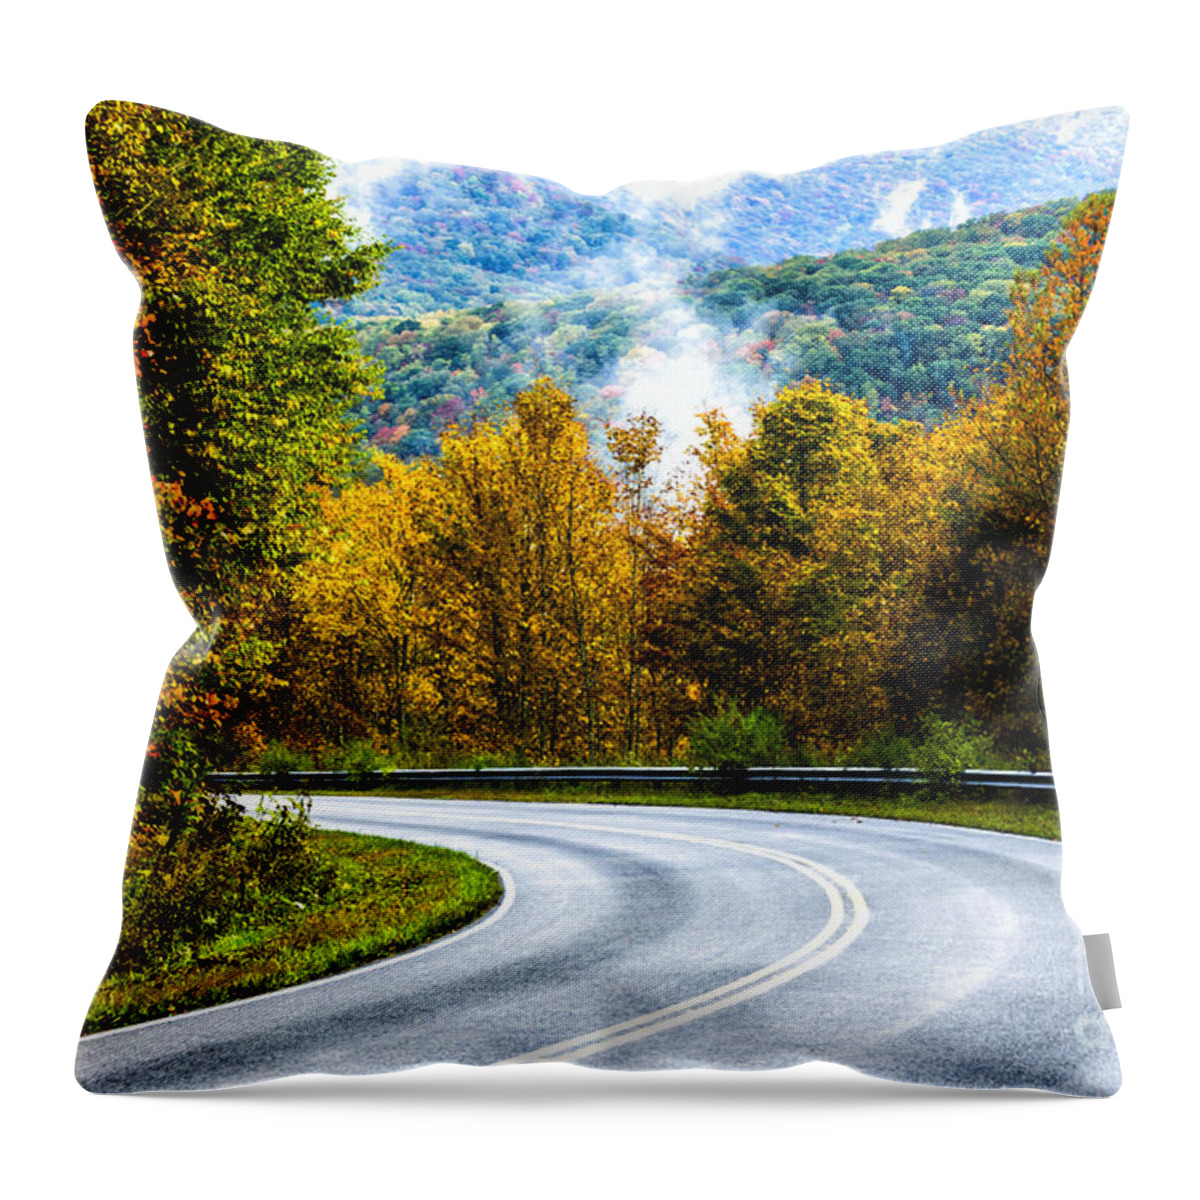 Fall Throw Pillow featuring the photograph Highland Scenic Highway Autumn by Thomas R Fletcher